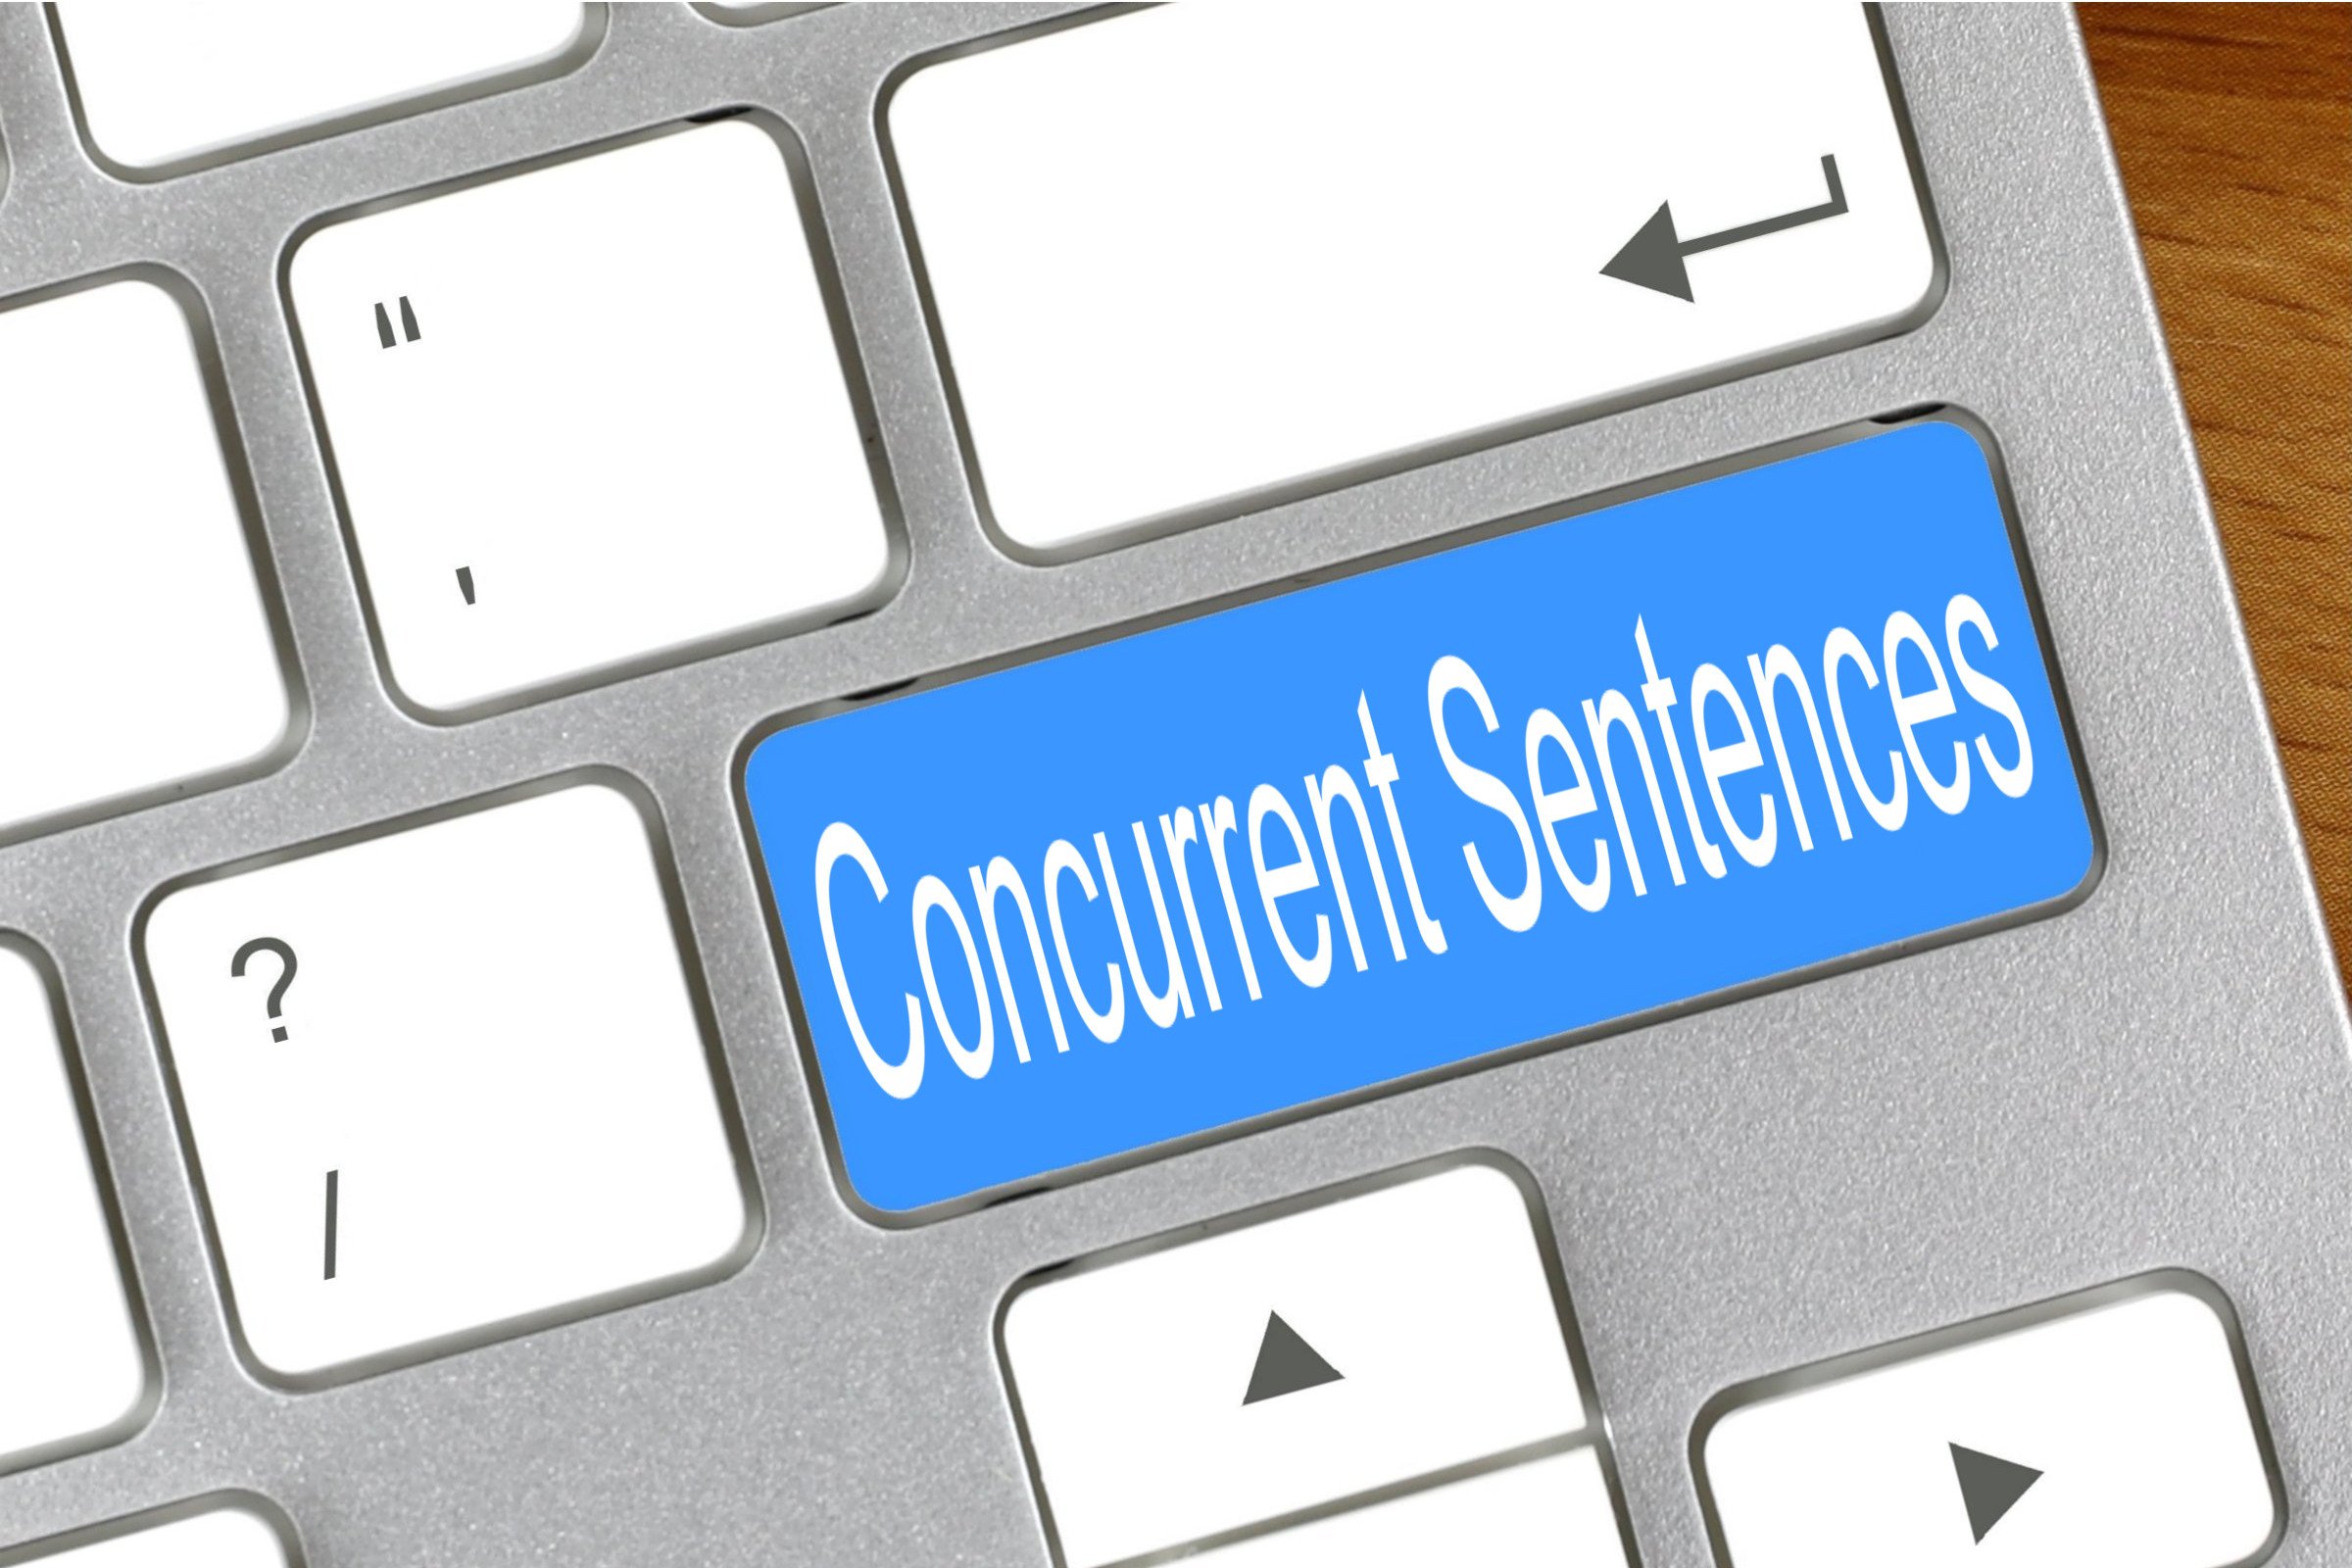 free-of-charge-creative-commons-concurrent-sentences-image-keyboard-2